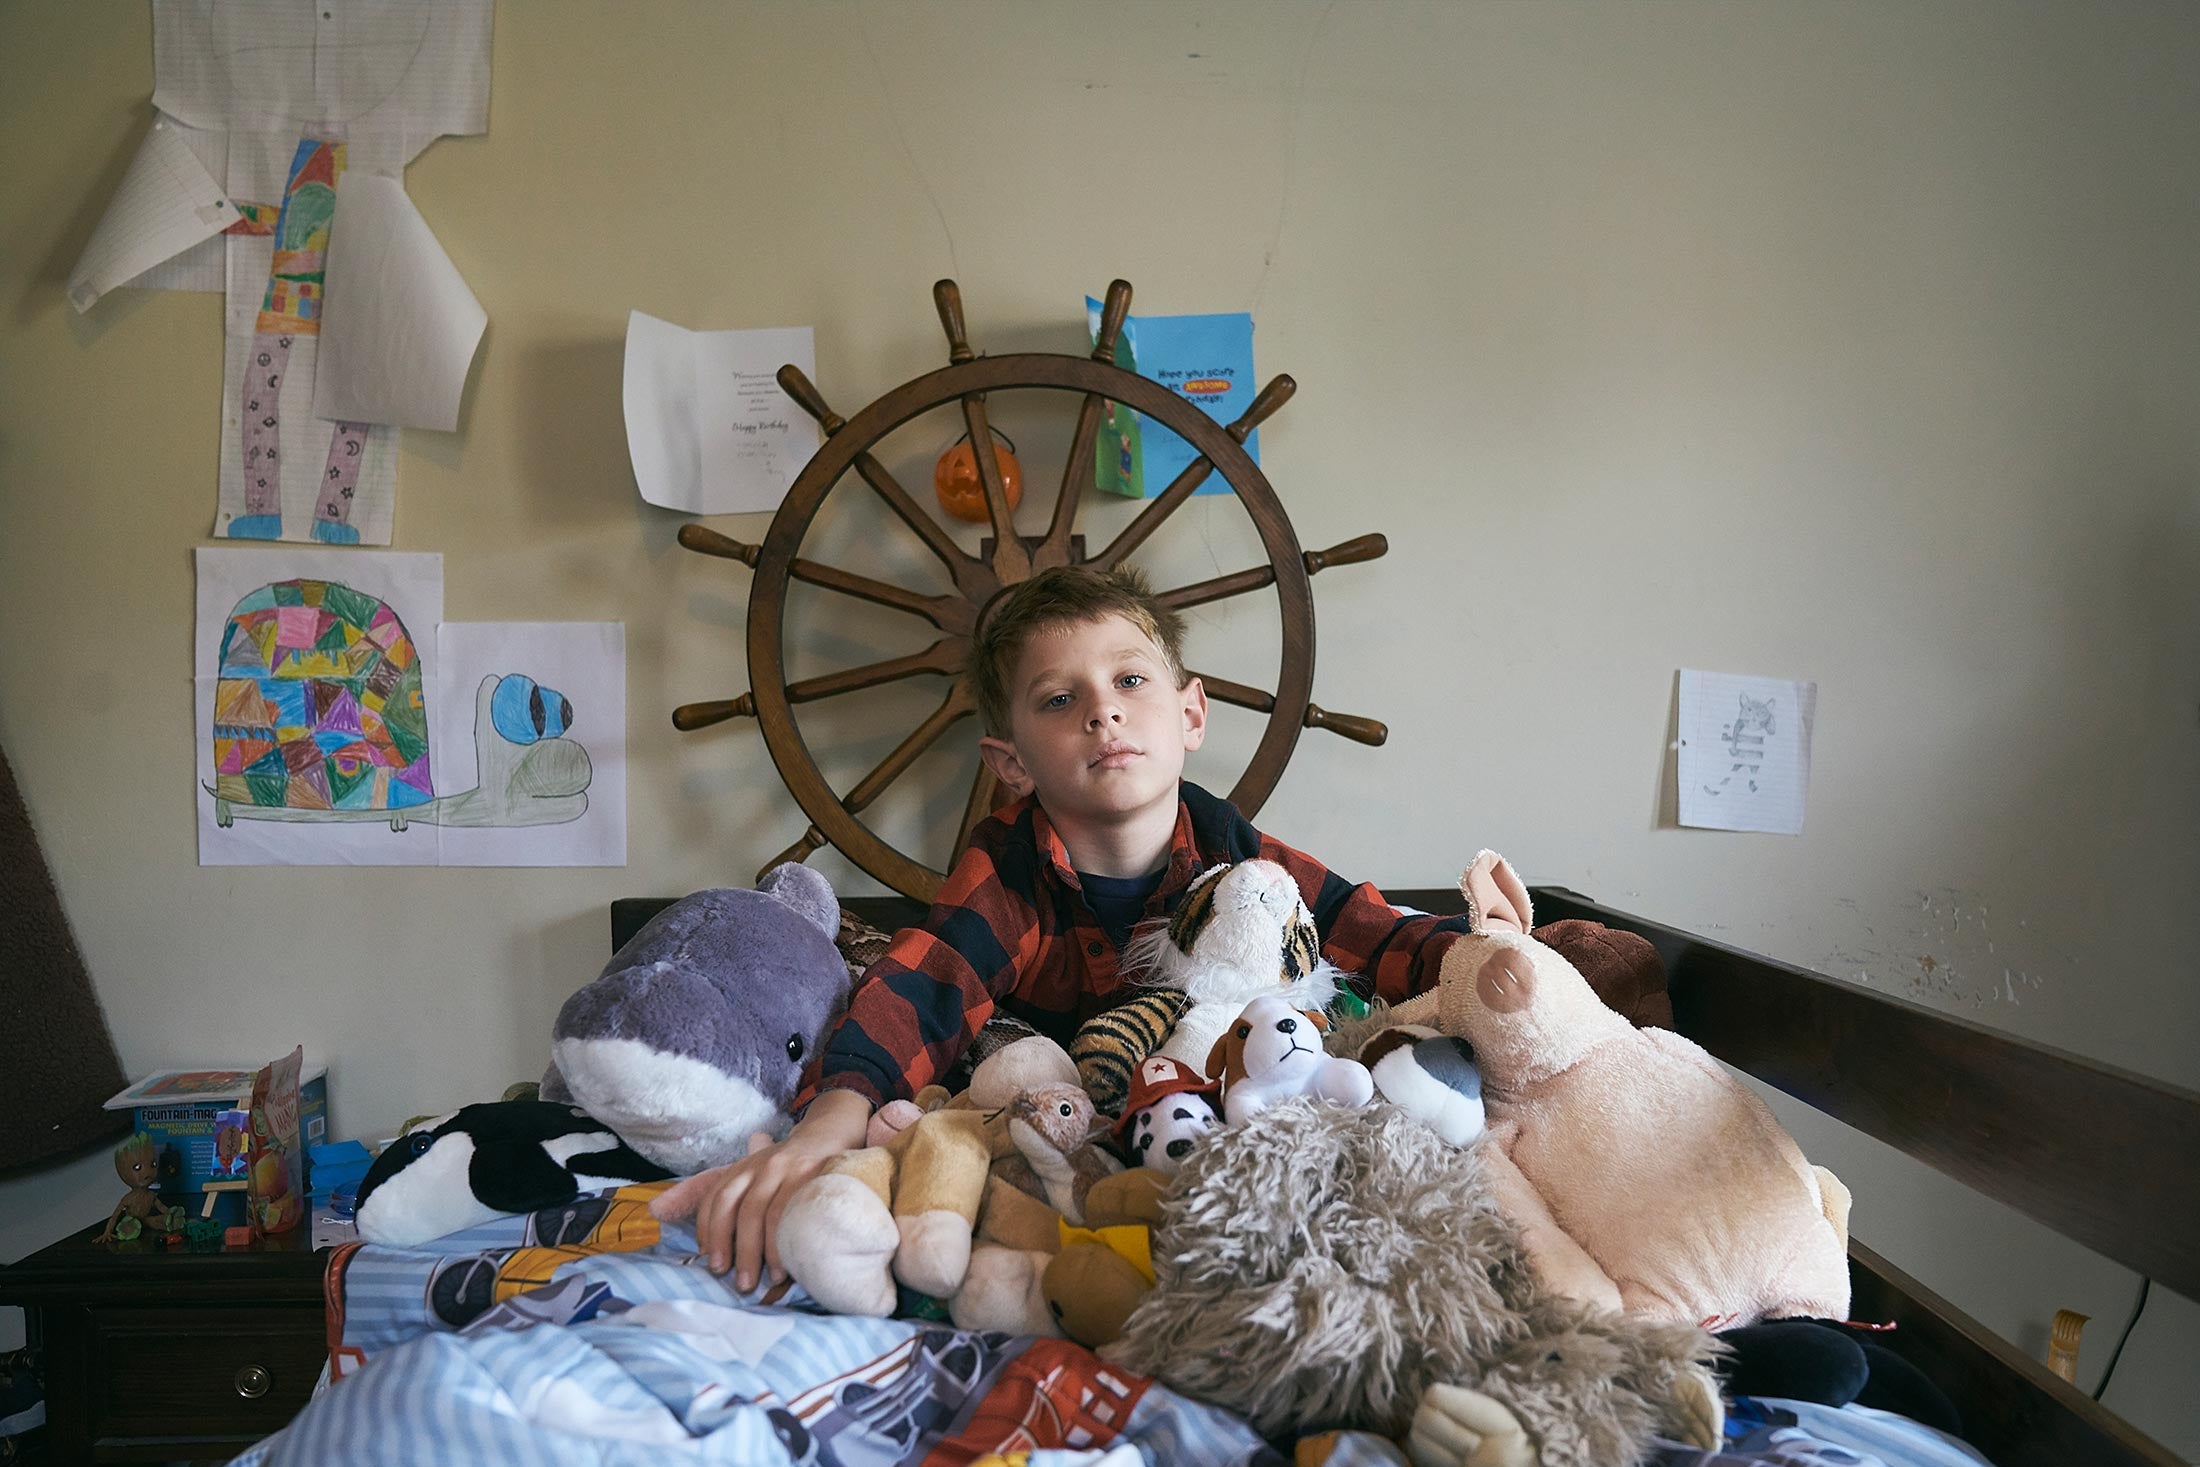 Colin, surrounded by his stuffed animals sitting on his bed.